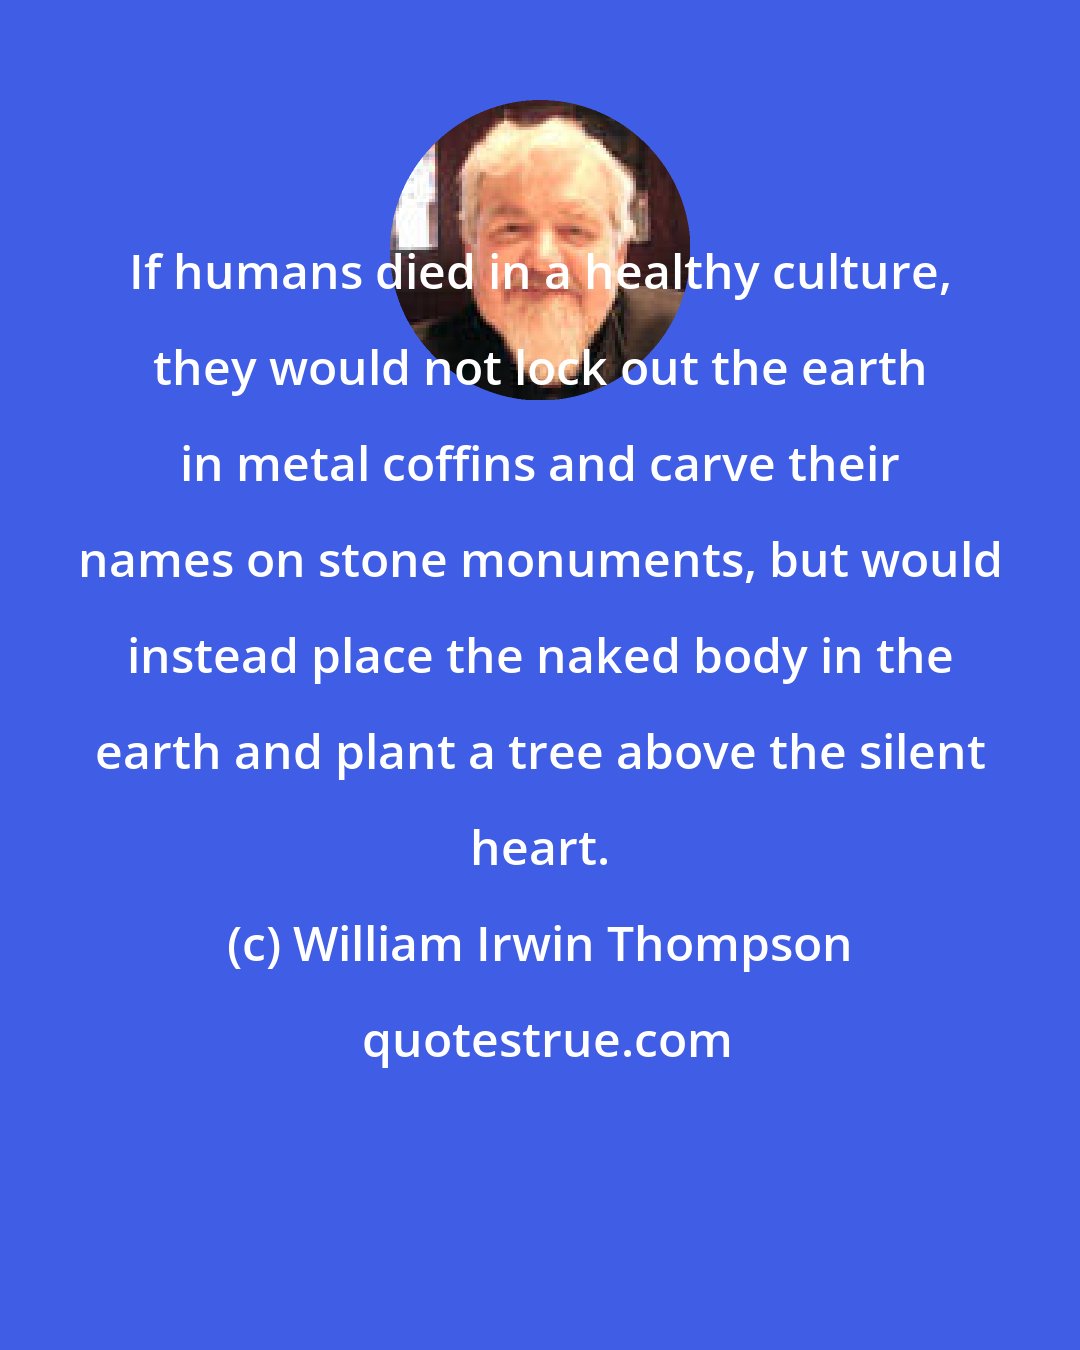 William Irwin Thompson: If humans died in a healthy culture, they would not lock out the earth in metal coffins and carve their names on stone monuments, but would instead place the naked body in the earth and plant a tree above the silent heart.